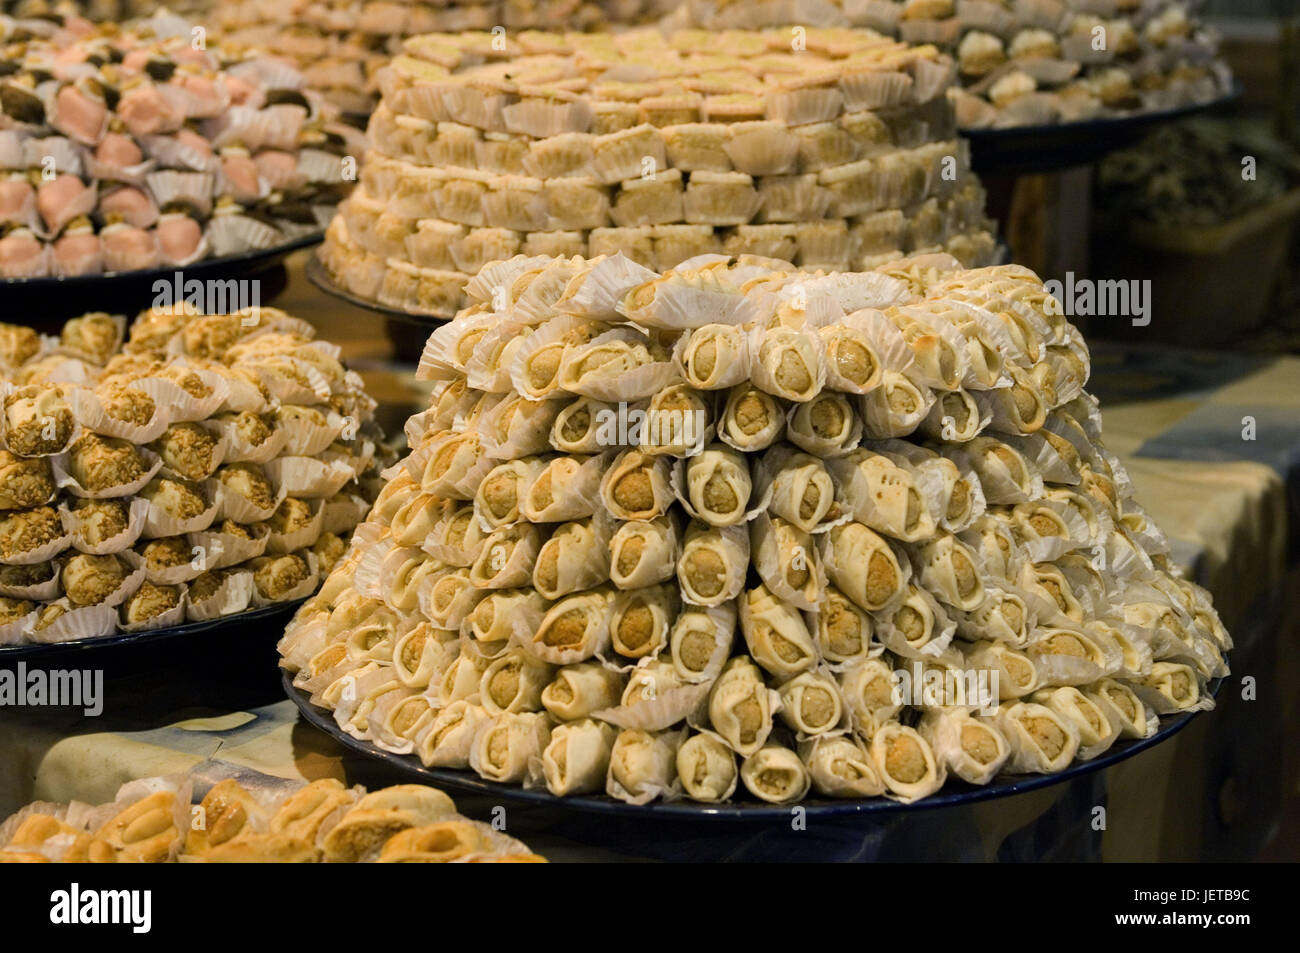 Morocco, Meknes, market, sales, cake, sweets, Africa, North Africa, town, food, Food, snacks, cakes and pastries, small cake, stacked, Stock Photo